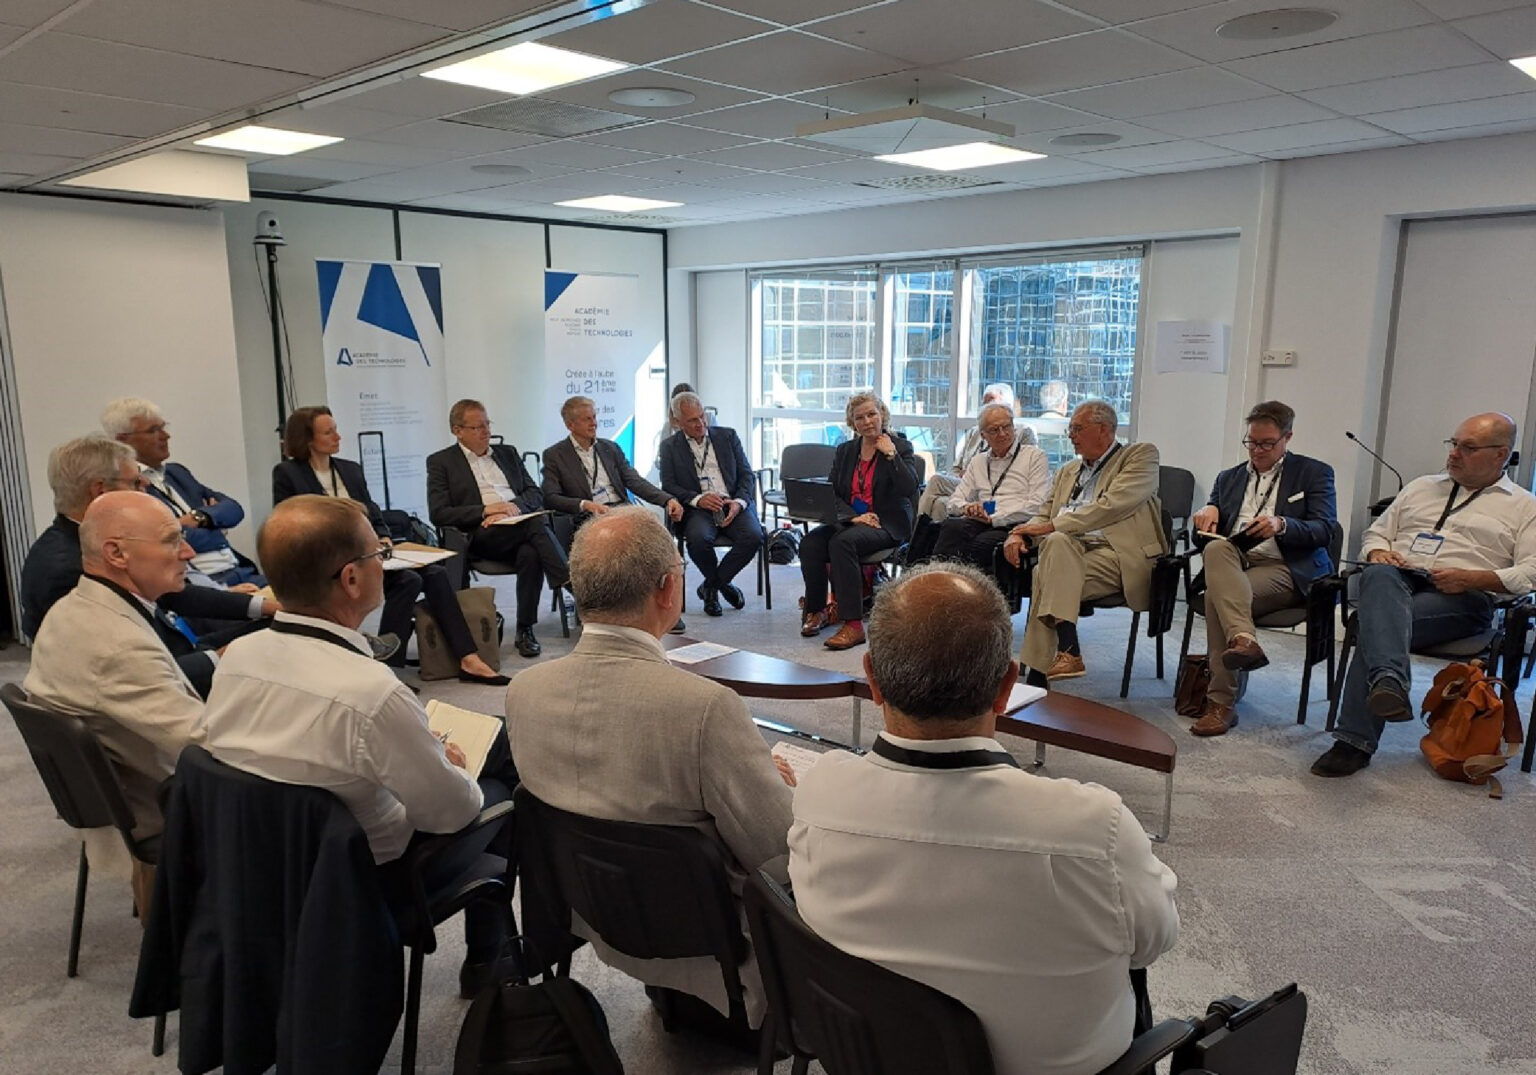 Discussing the next steps in the collaboration between acatech – National Academy of Science and Engineering and NATF – National Academy of Technologies of France.